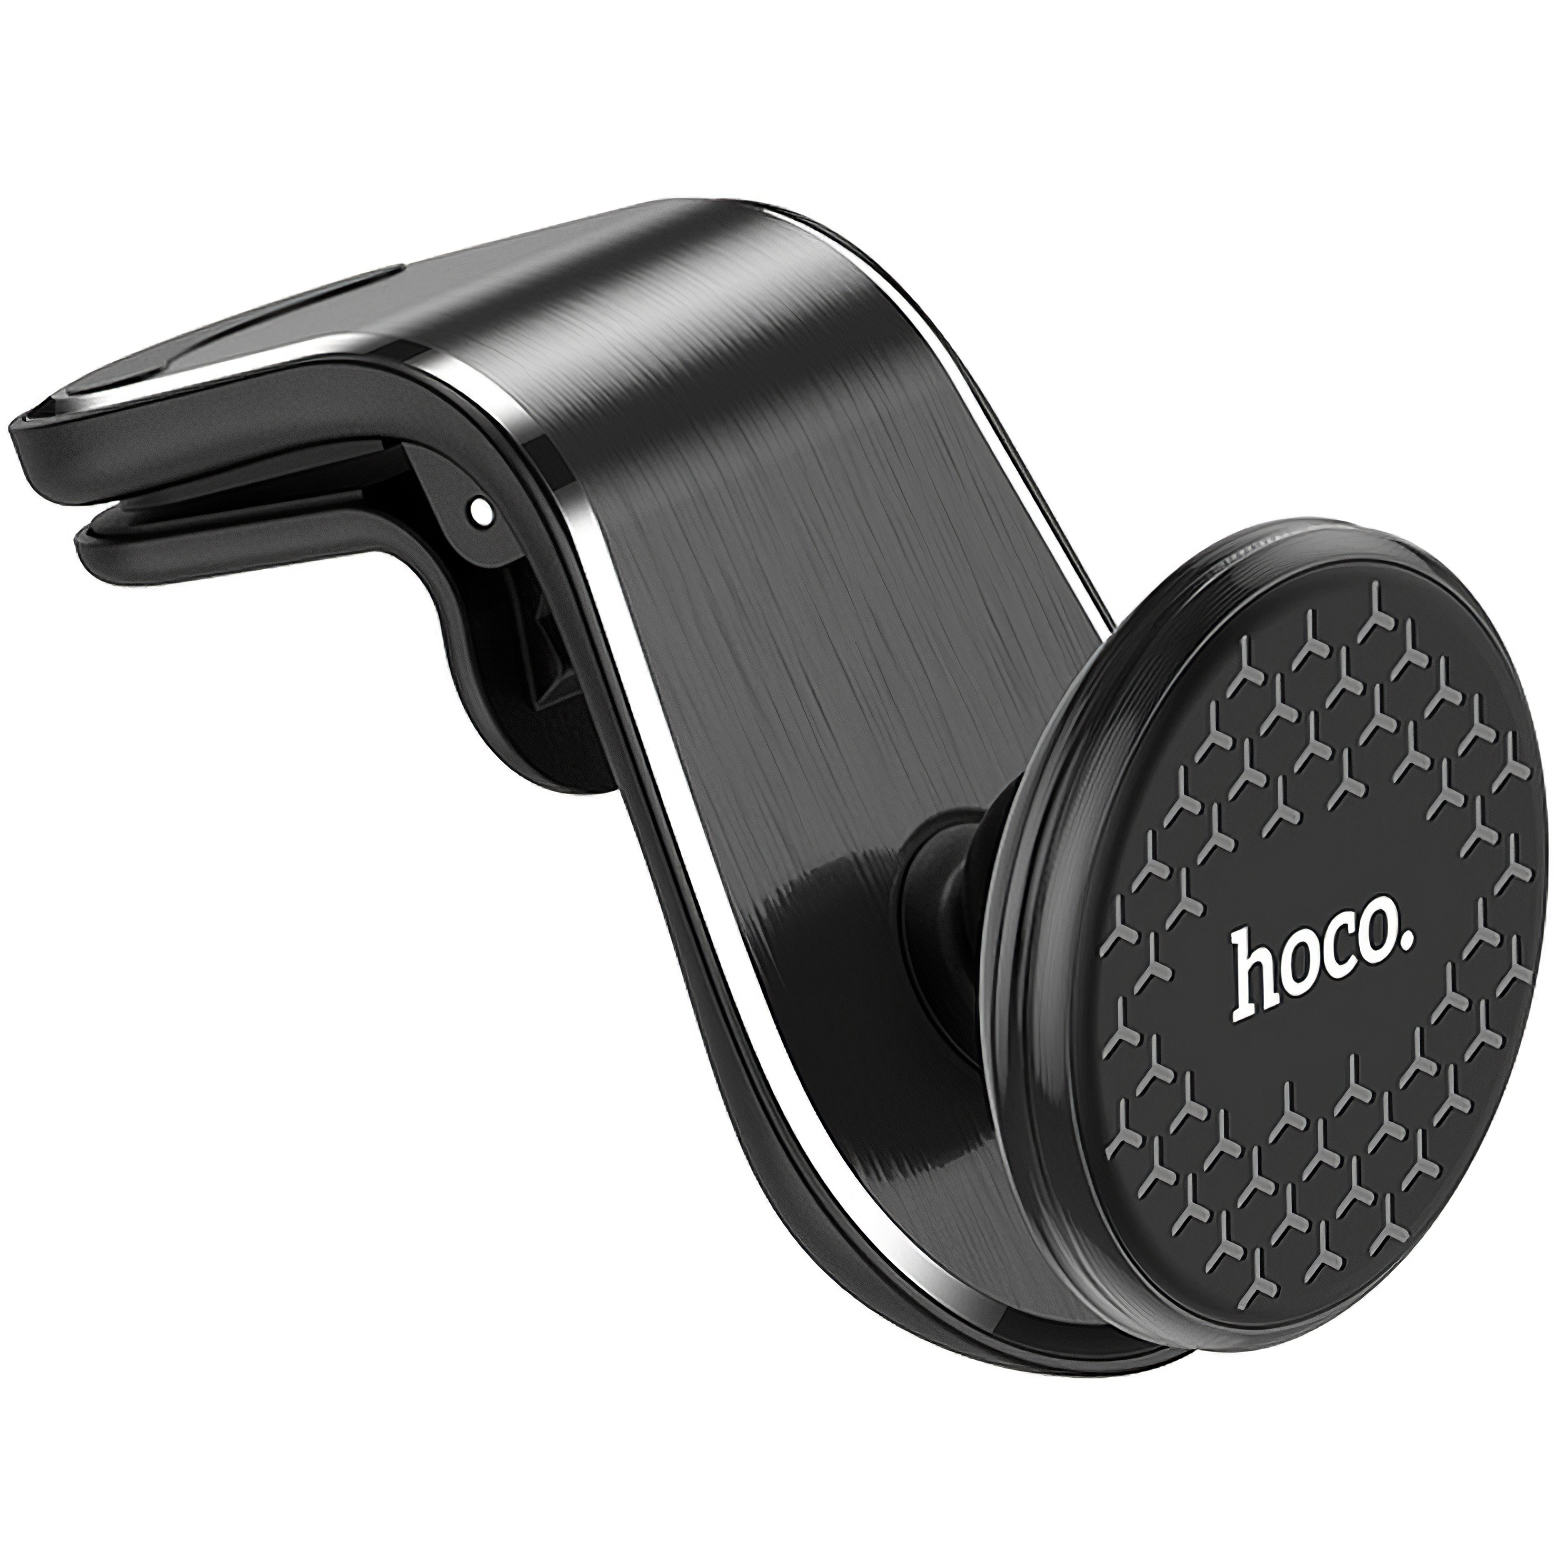 hoco-magnetic-car-holder-ca59-victory-air-outlet-2C-black--28eu-blister-29